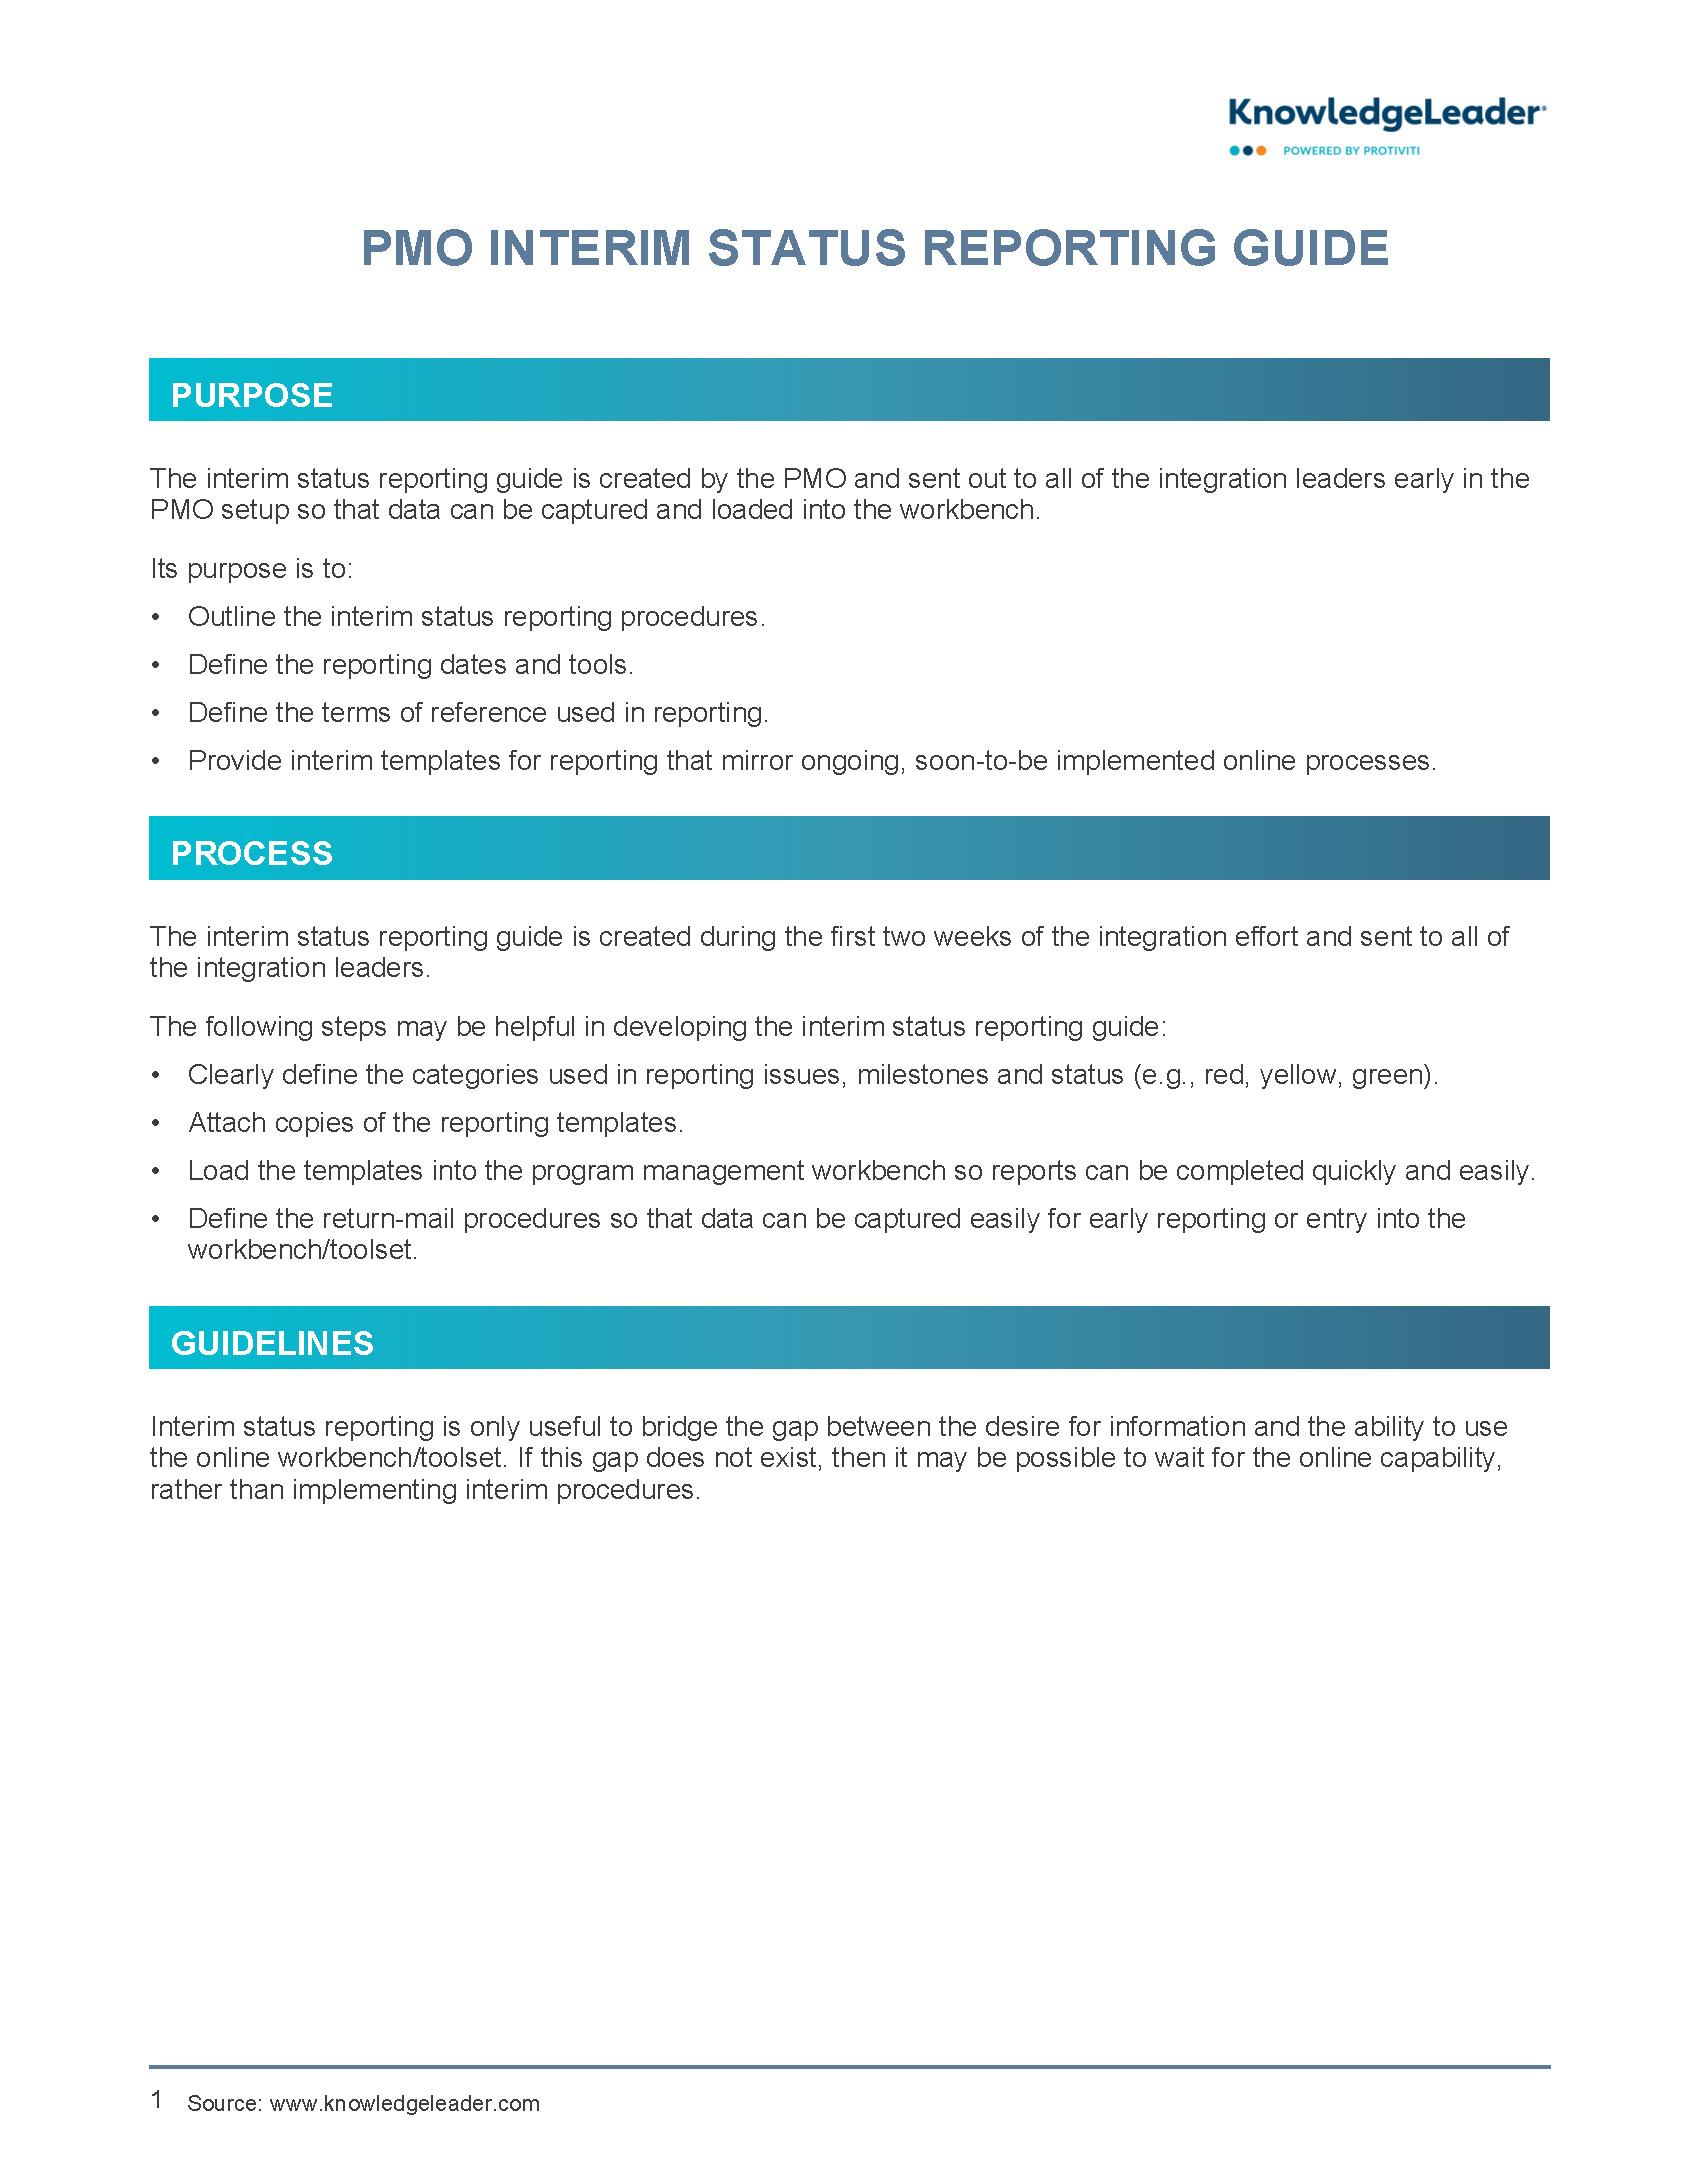 Screenshot of the first page of PMO Interim Status Reporting Guide